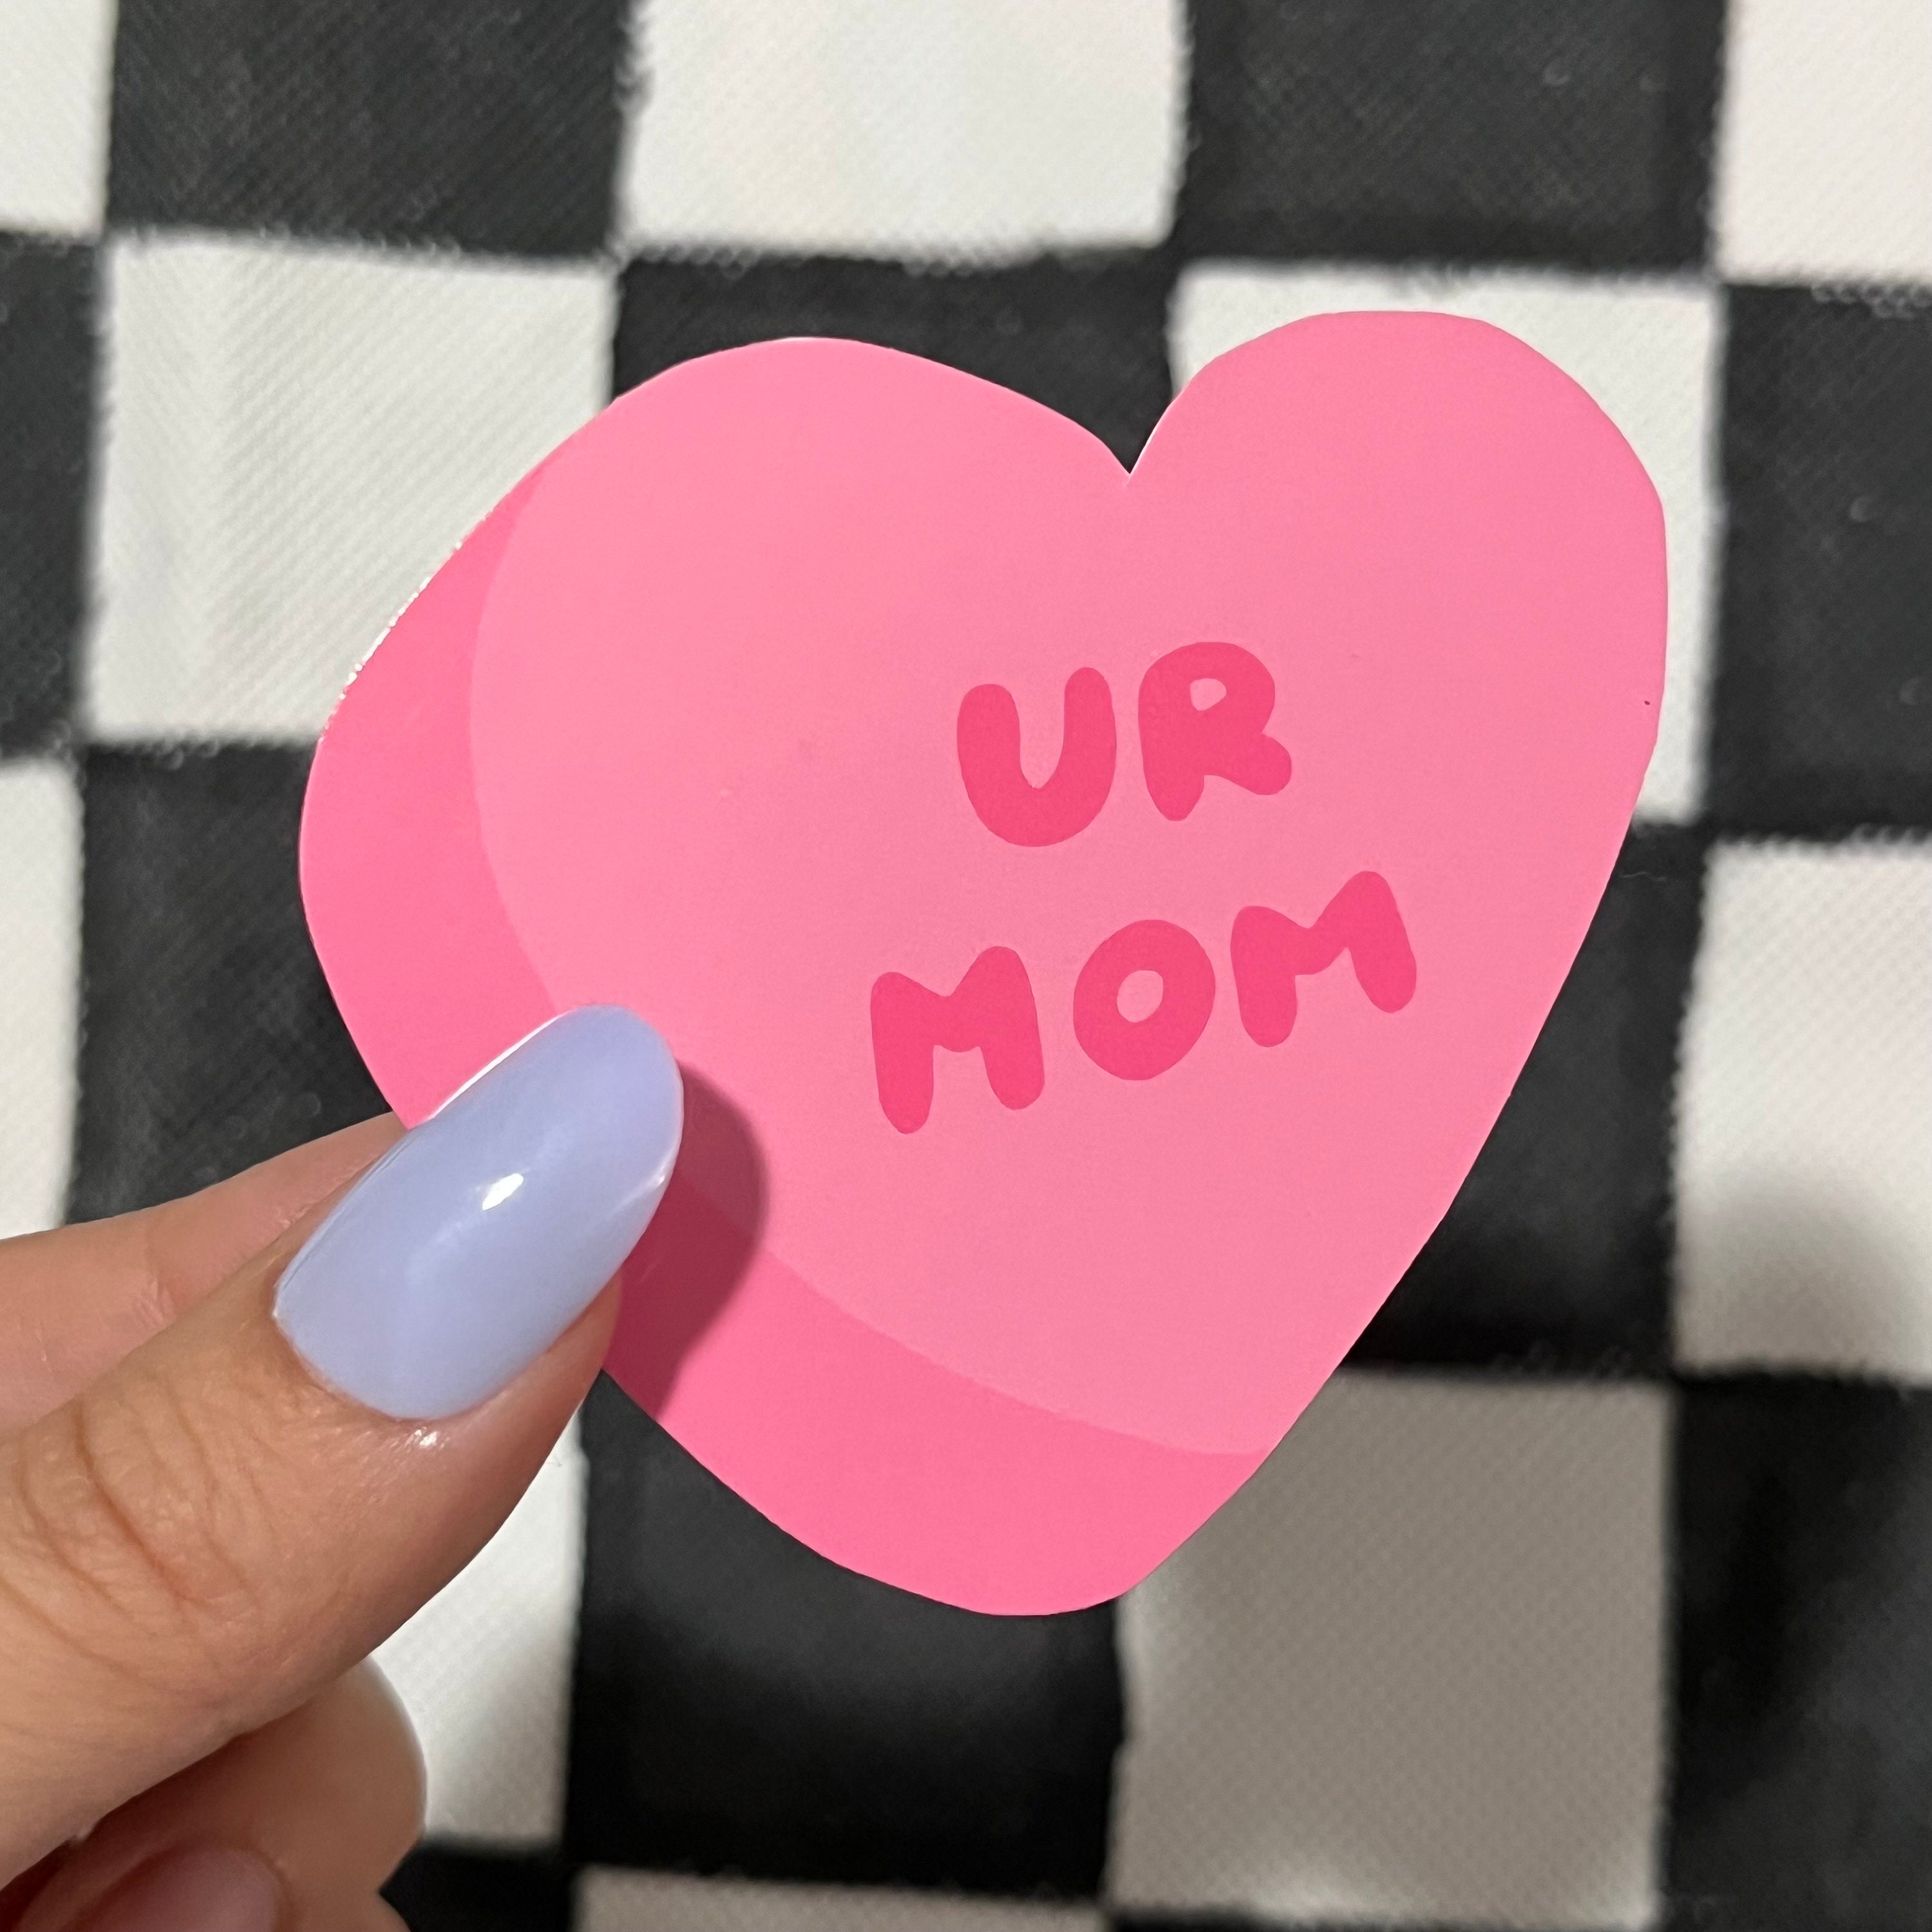 Being My Mom is Really the Only Gift You Need Funny Mom Gift for Mothe –  Cute But Rude